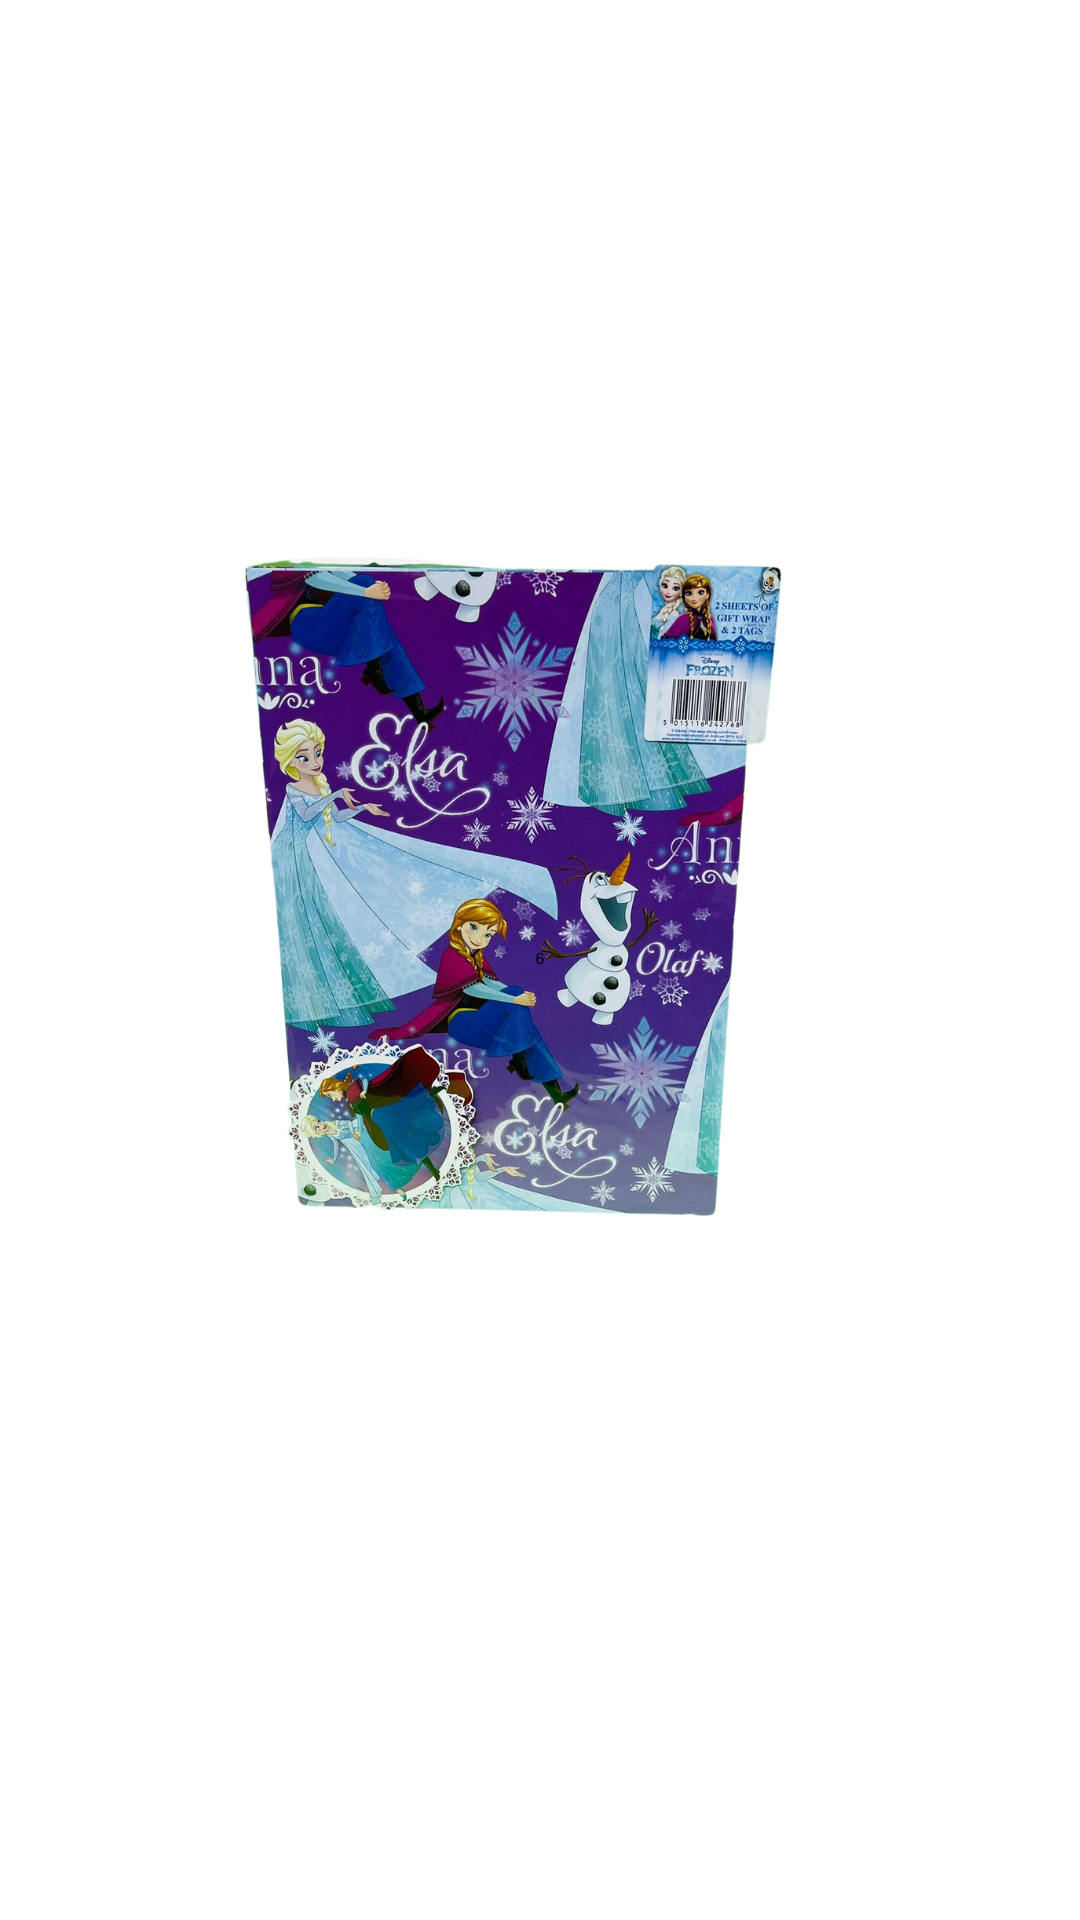 Disney Frozen Wrapping Paper for Birthday, Girls - 2 Sheets and 2 Tags